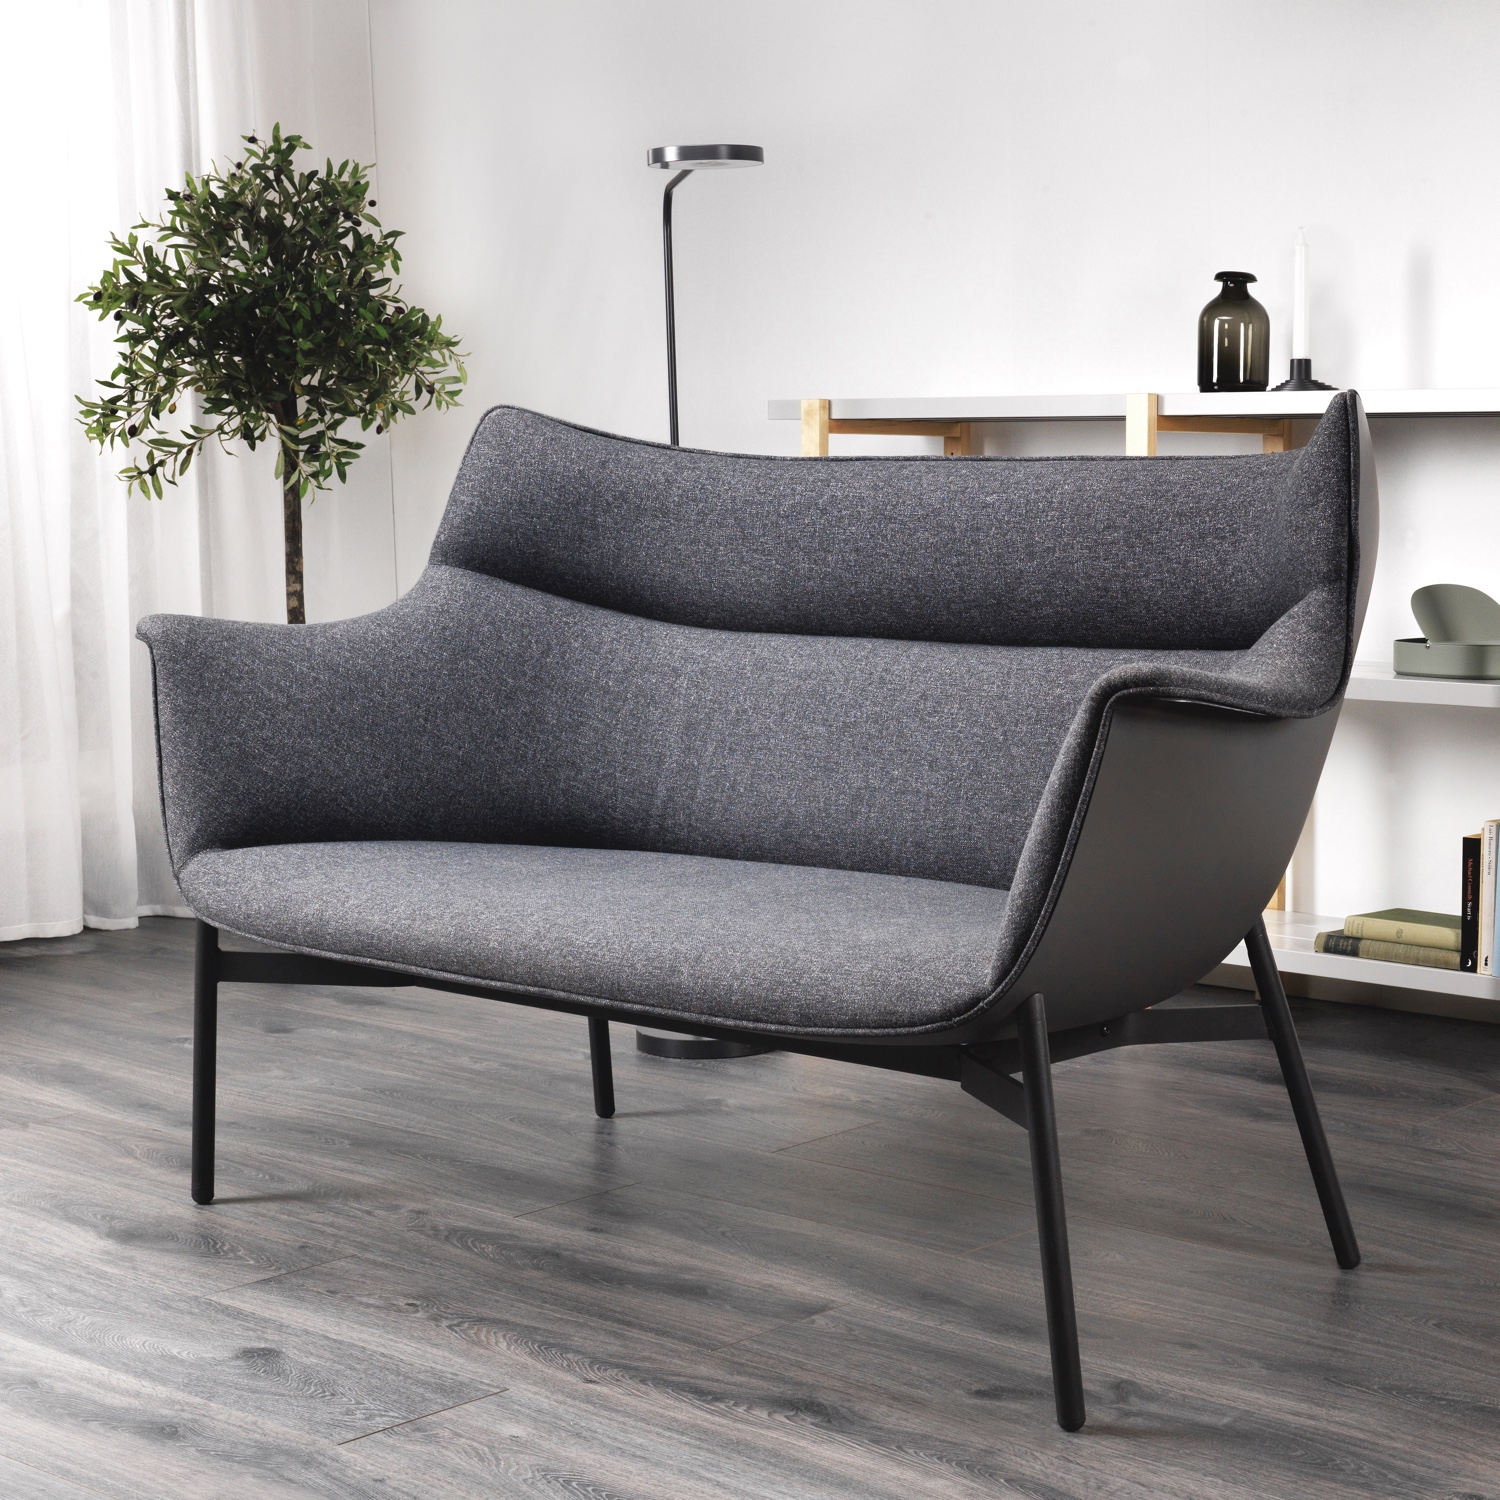 YPPERLIG-two-seater-sofa-front